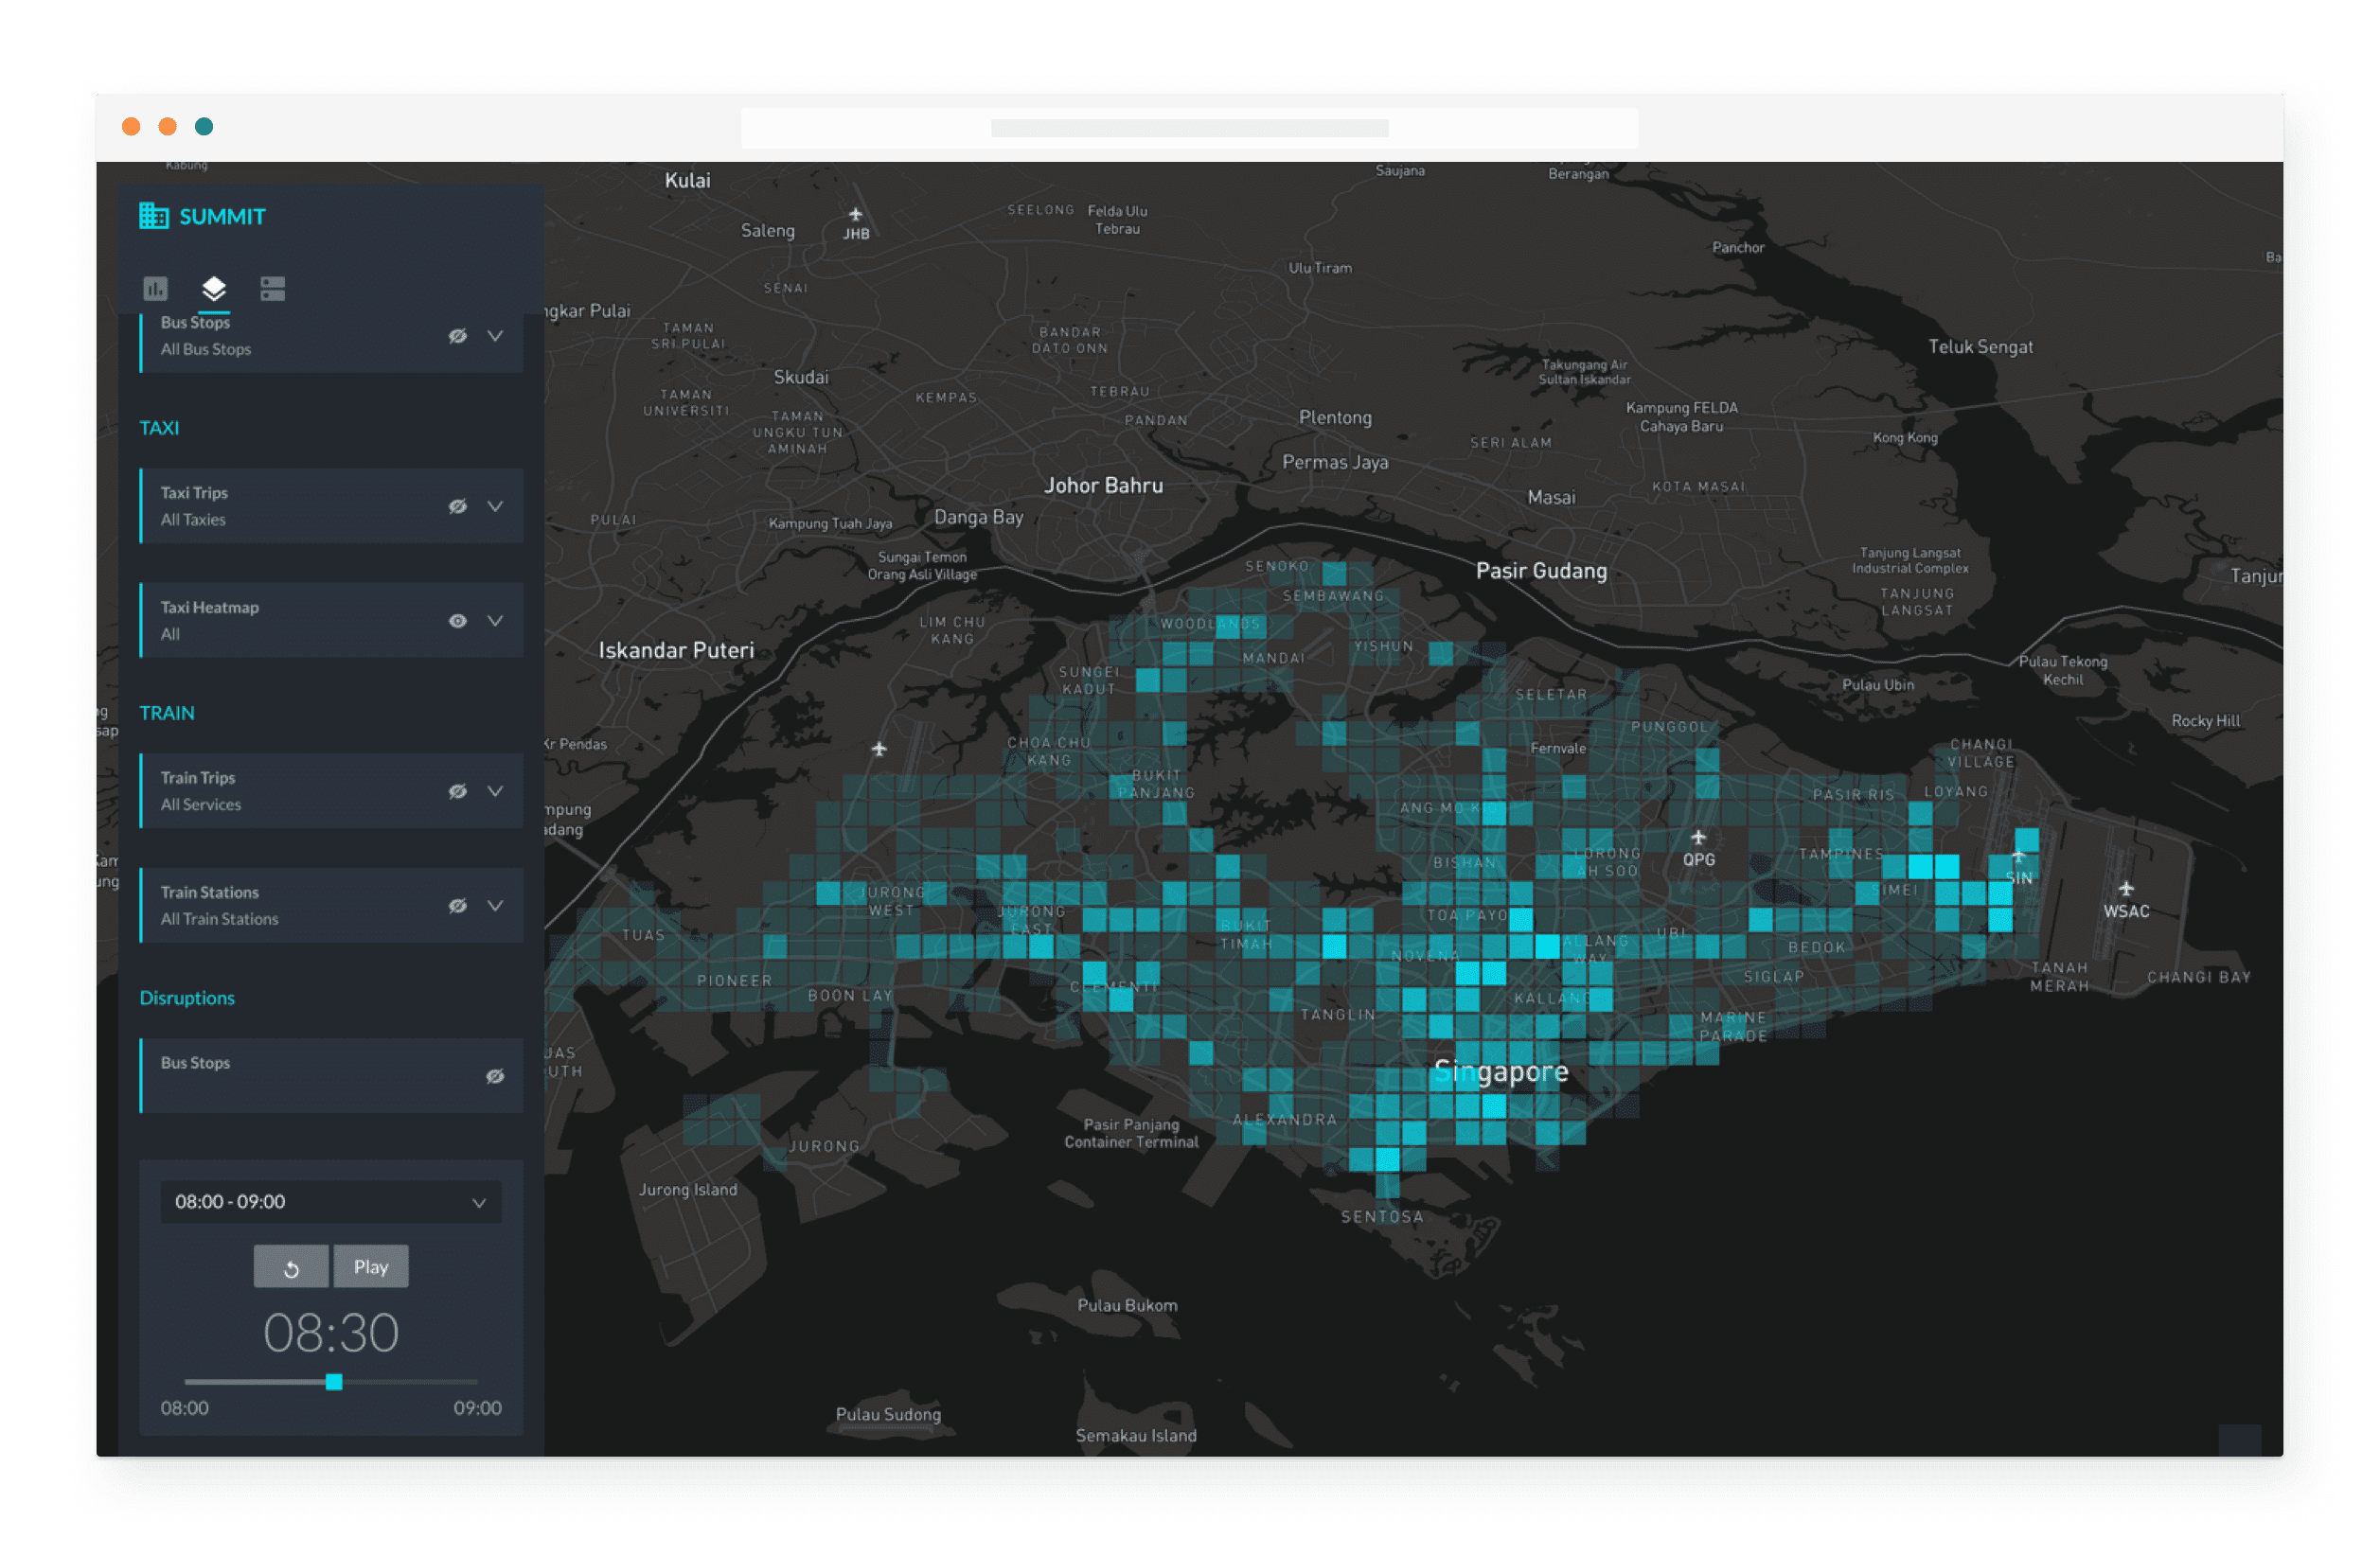 Heatmap of taxi density in Singapore